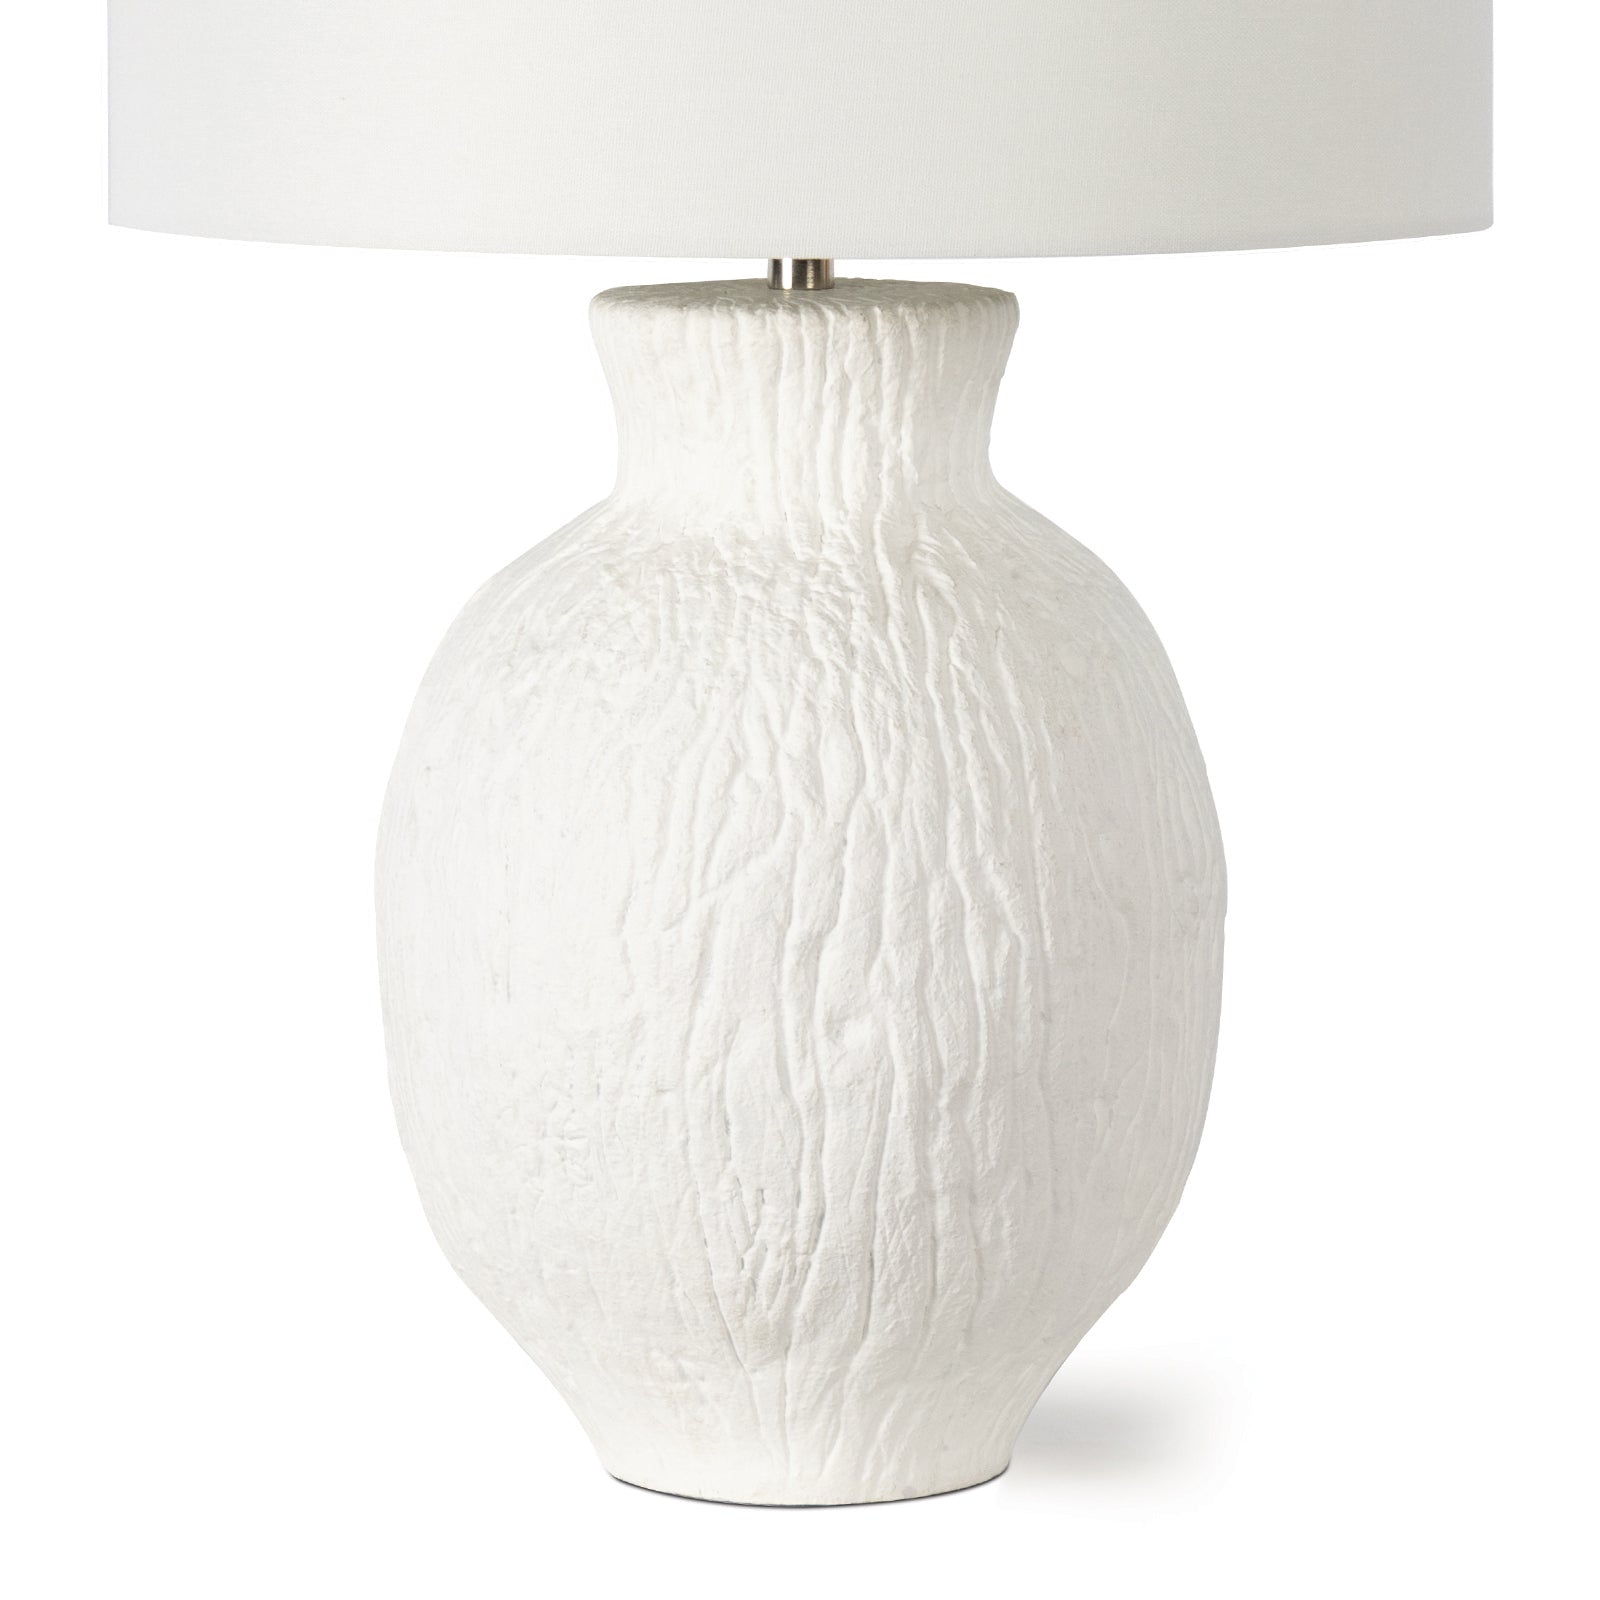 Coastal Living Willow Table Lamp